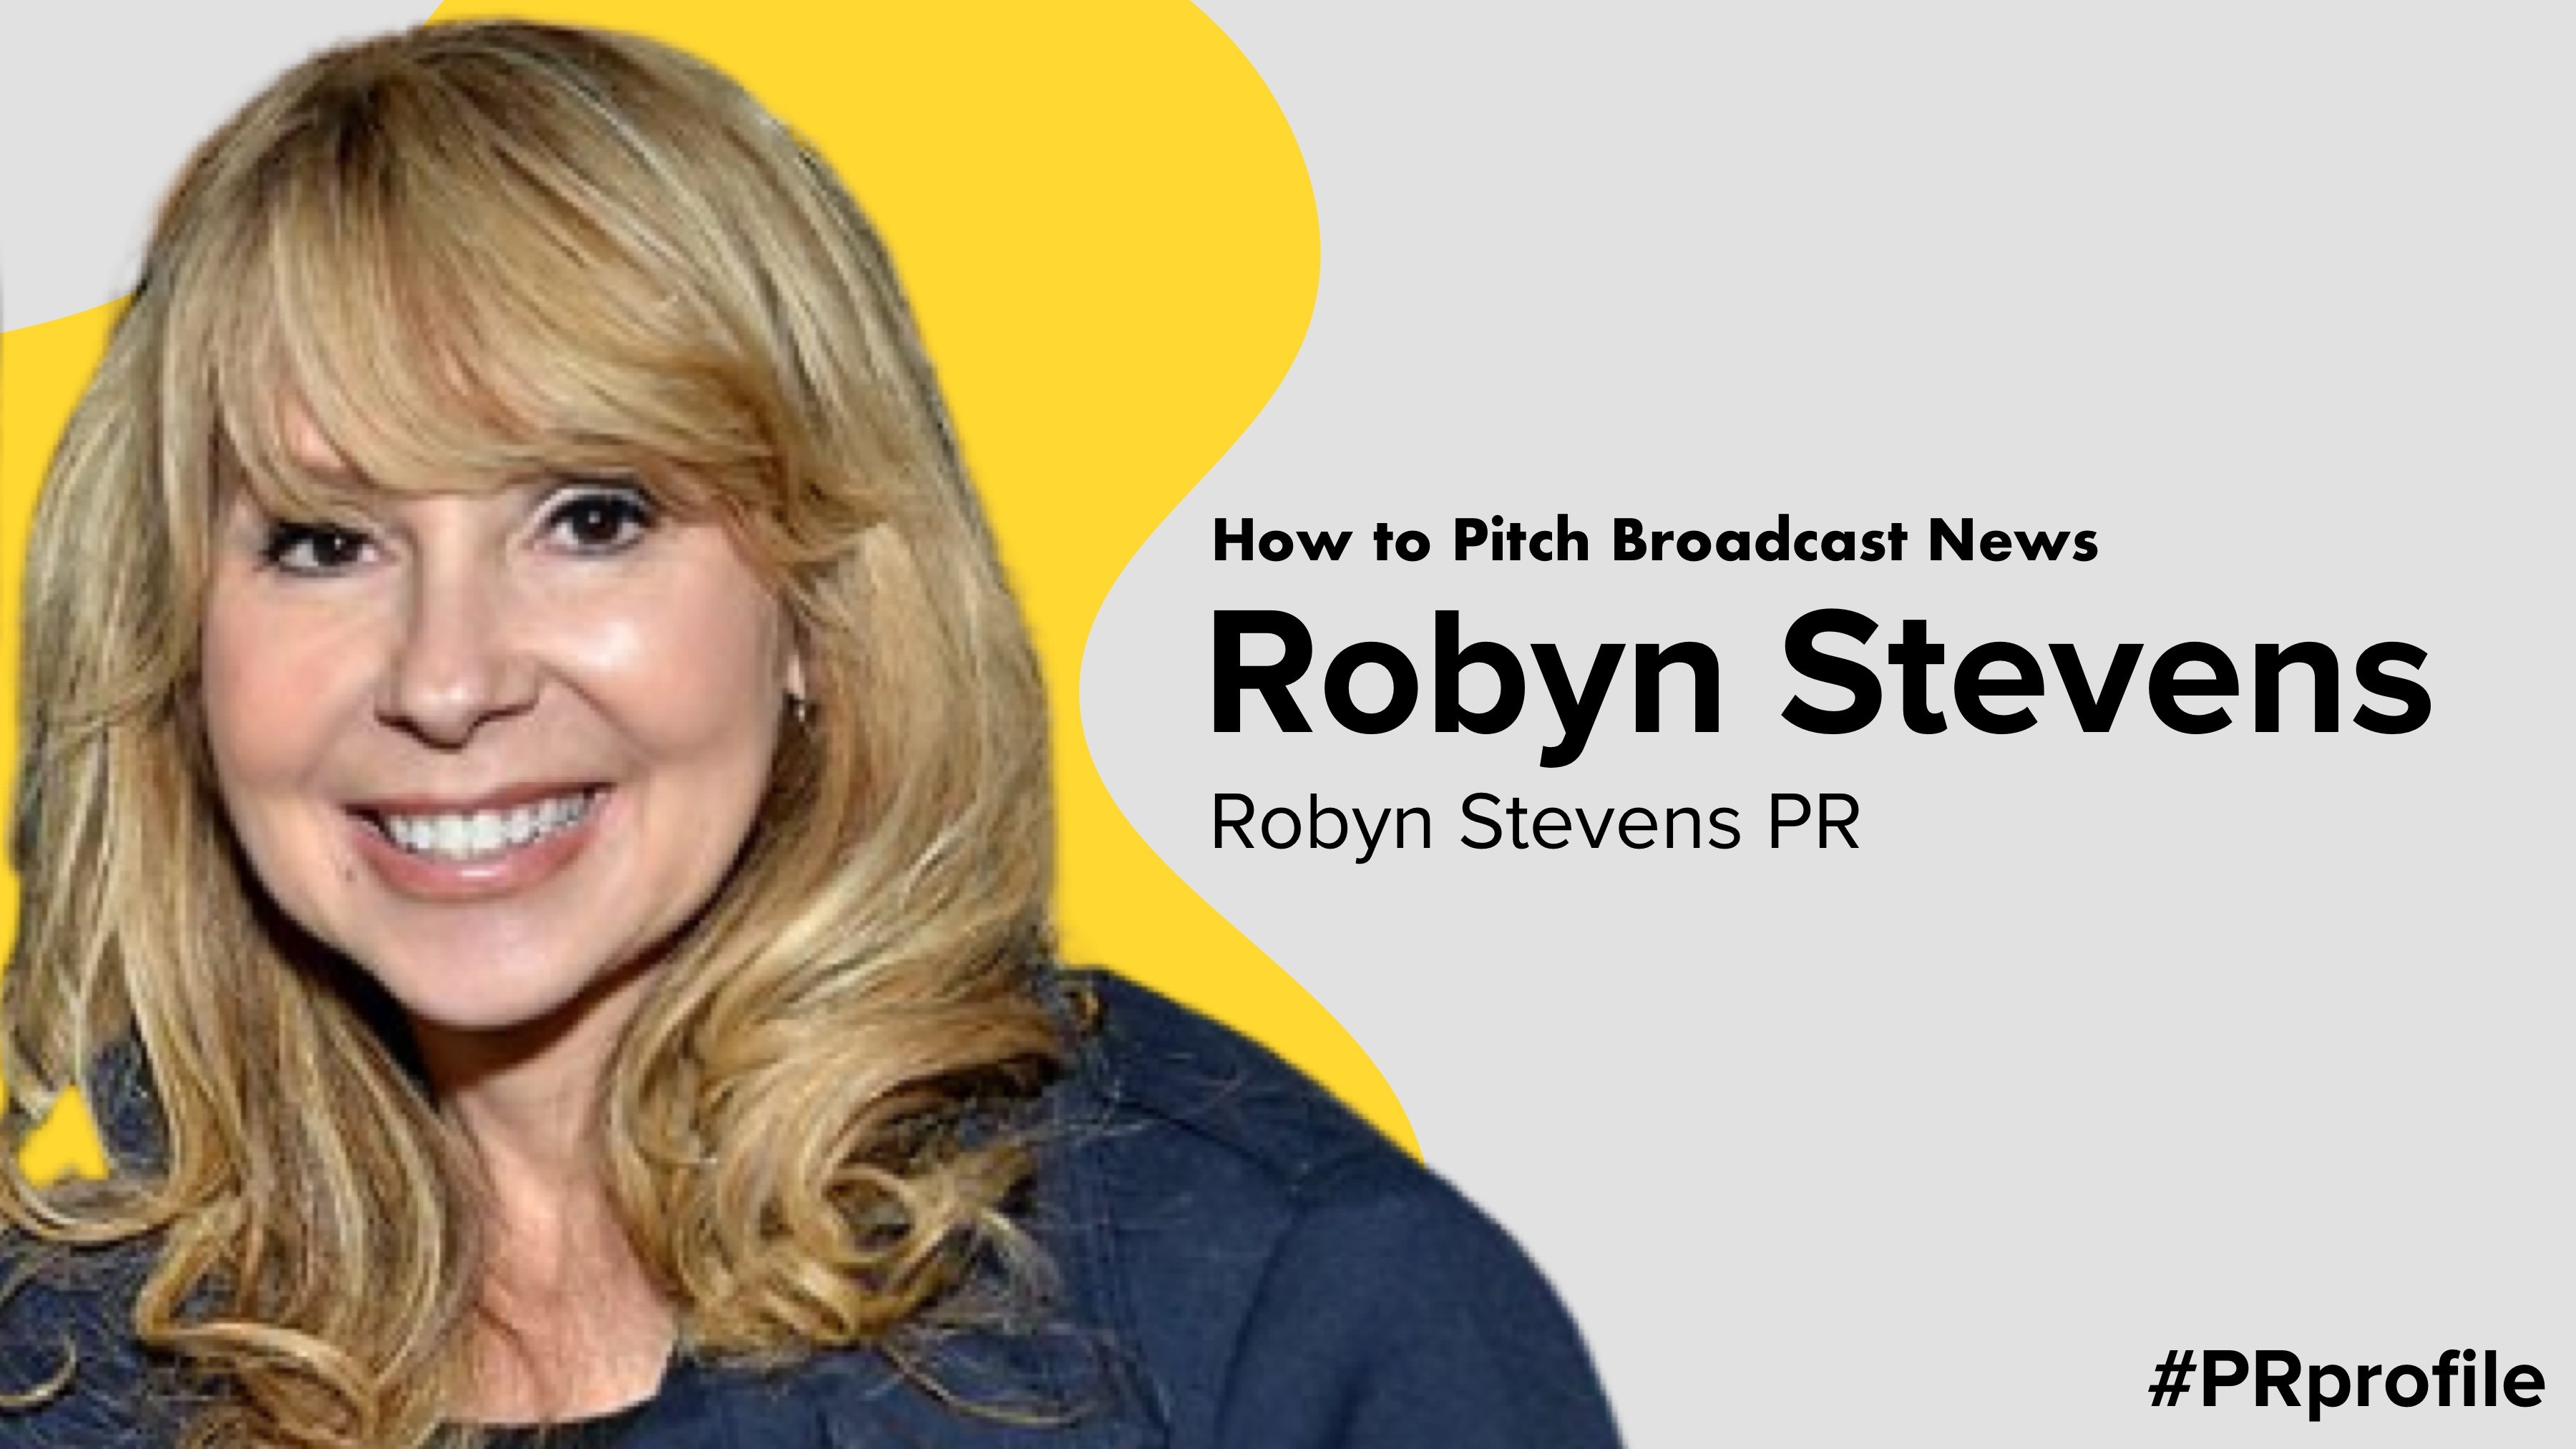 How to Pitch Broadcast News with Robyn Stevens